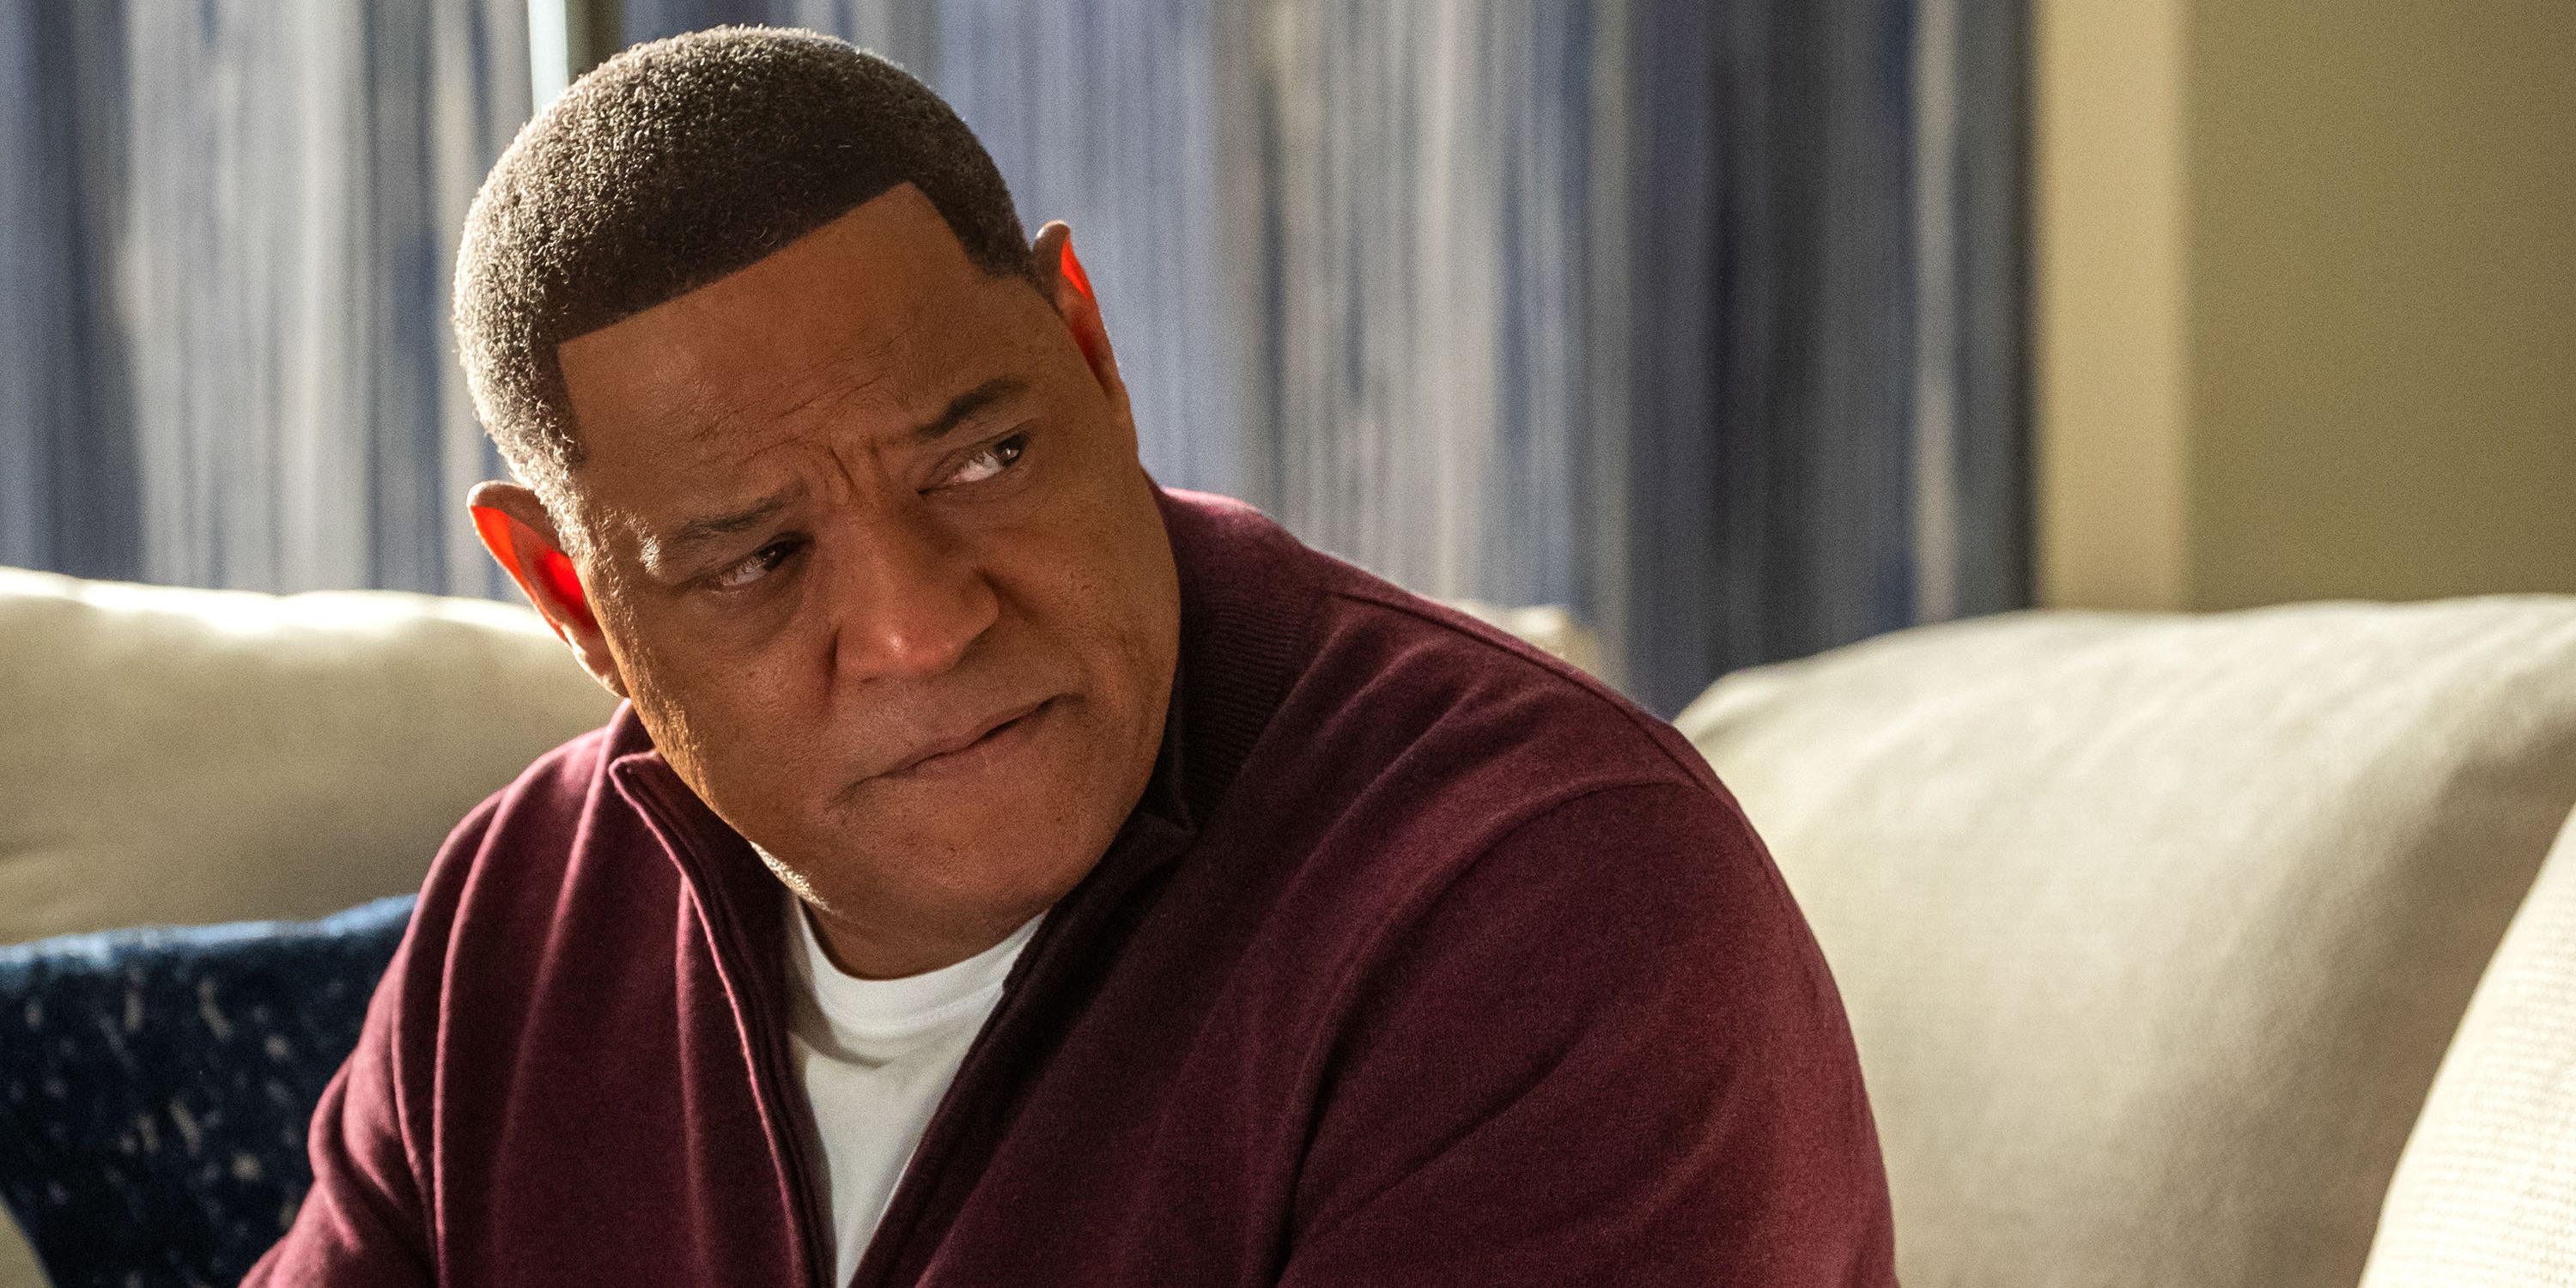 Laurence Fishburne as Doc Rivers looking concerned in Clipped.